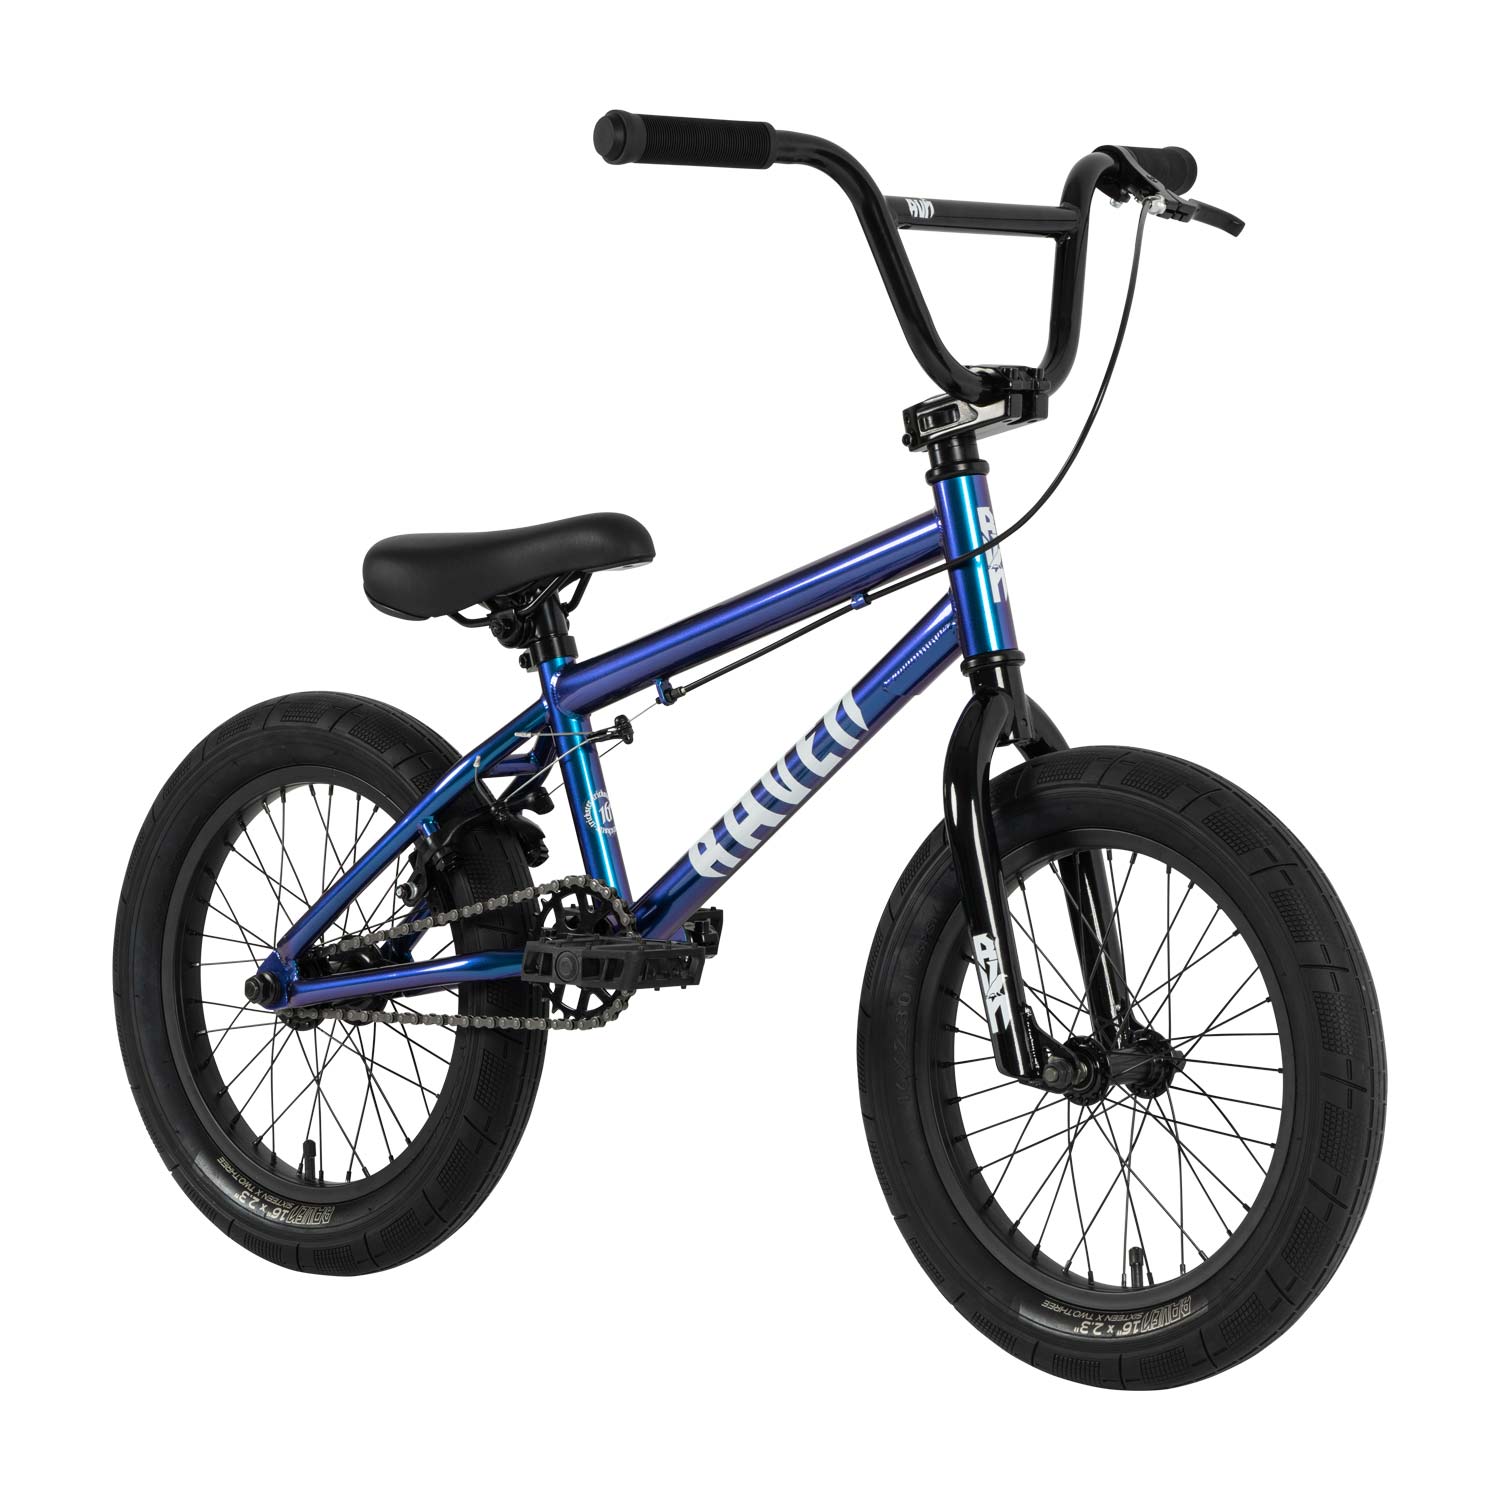 A blue Raven Trickster 16 Inch bike on a white background.